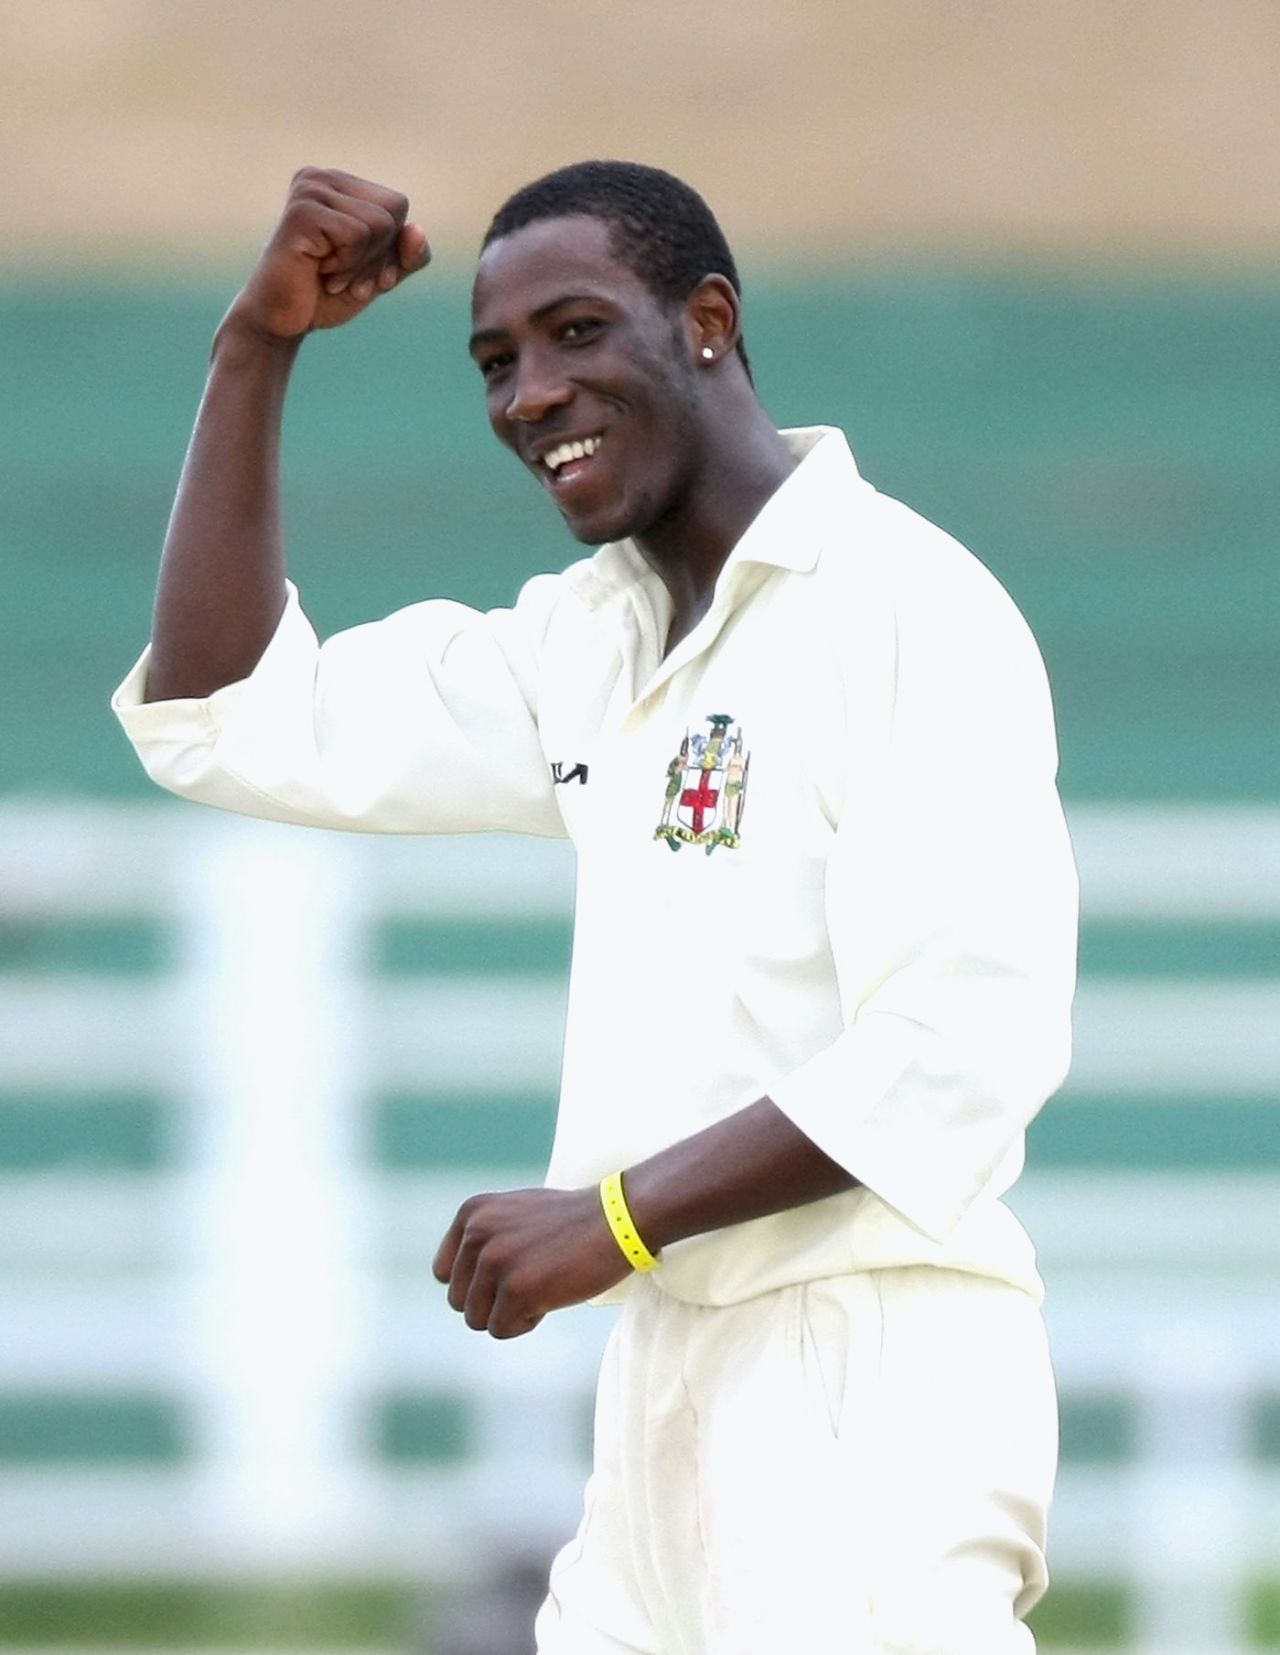 Andre Russell celebrates the wicket of Andrew Symonds, day two, tour match,  Jamaica Select XI vs Australia, Trelawny Stadium, Jamaica, May 17, 2008 